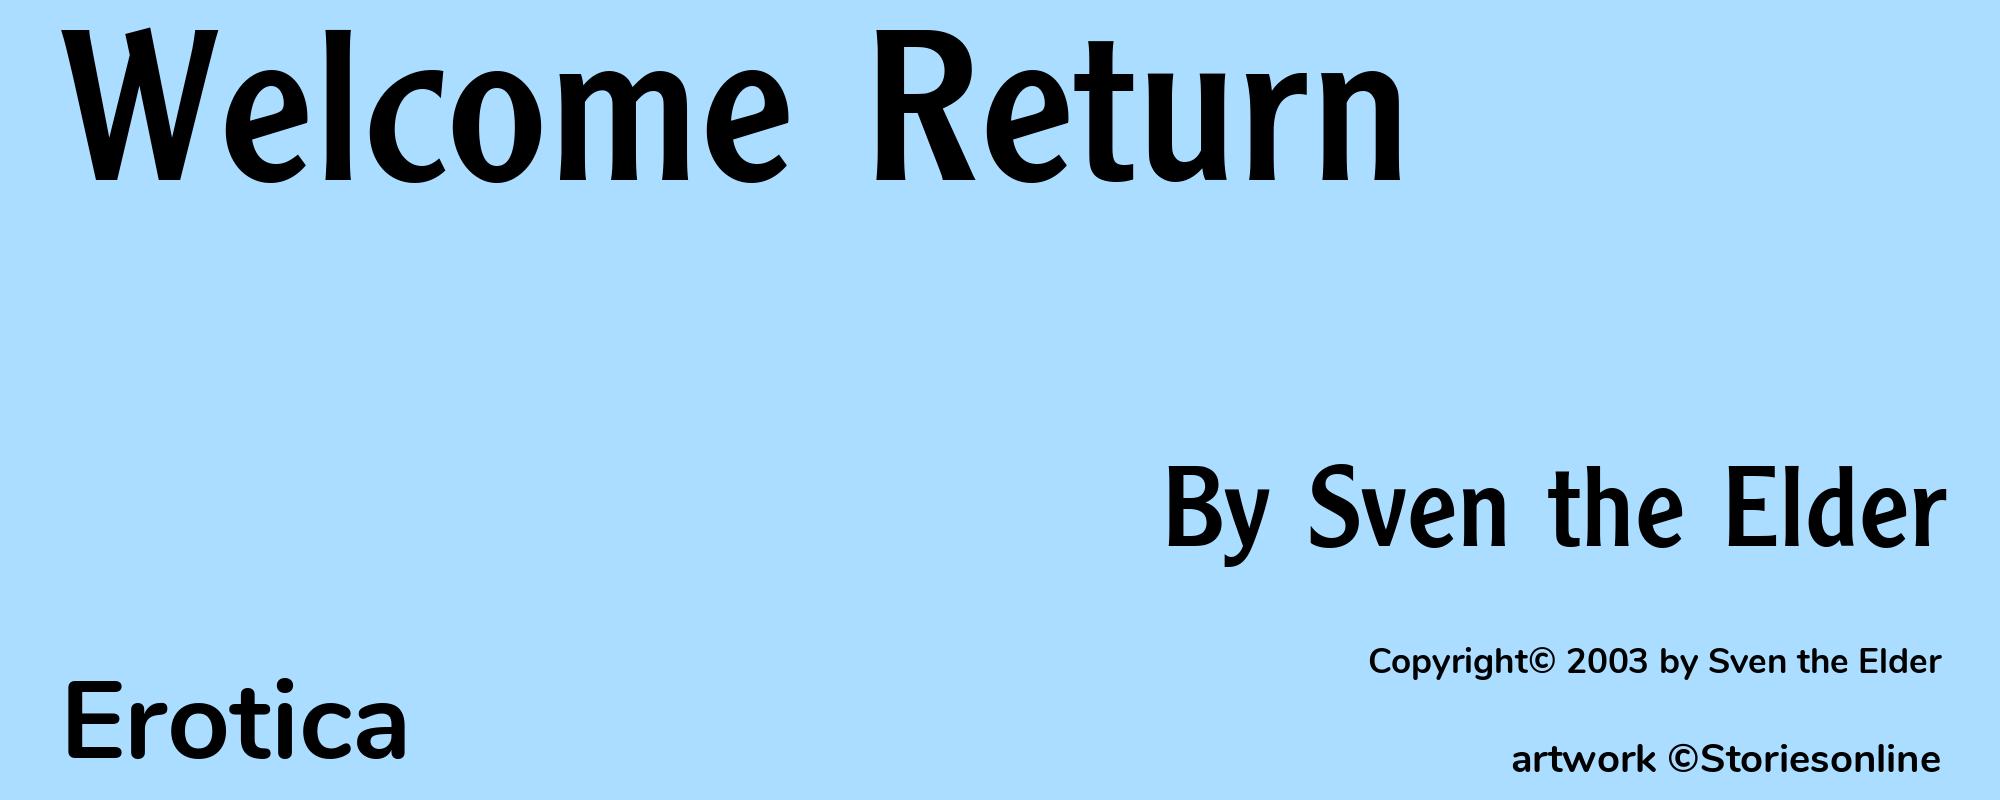 Welcome Return - Cover